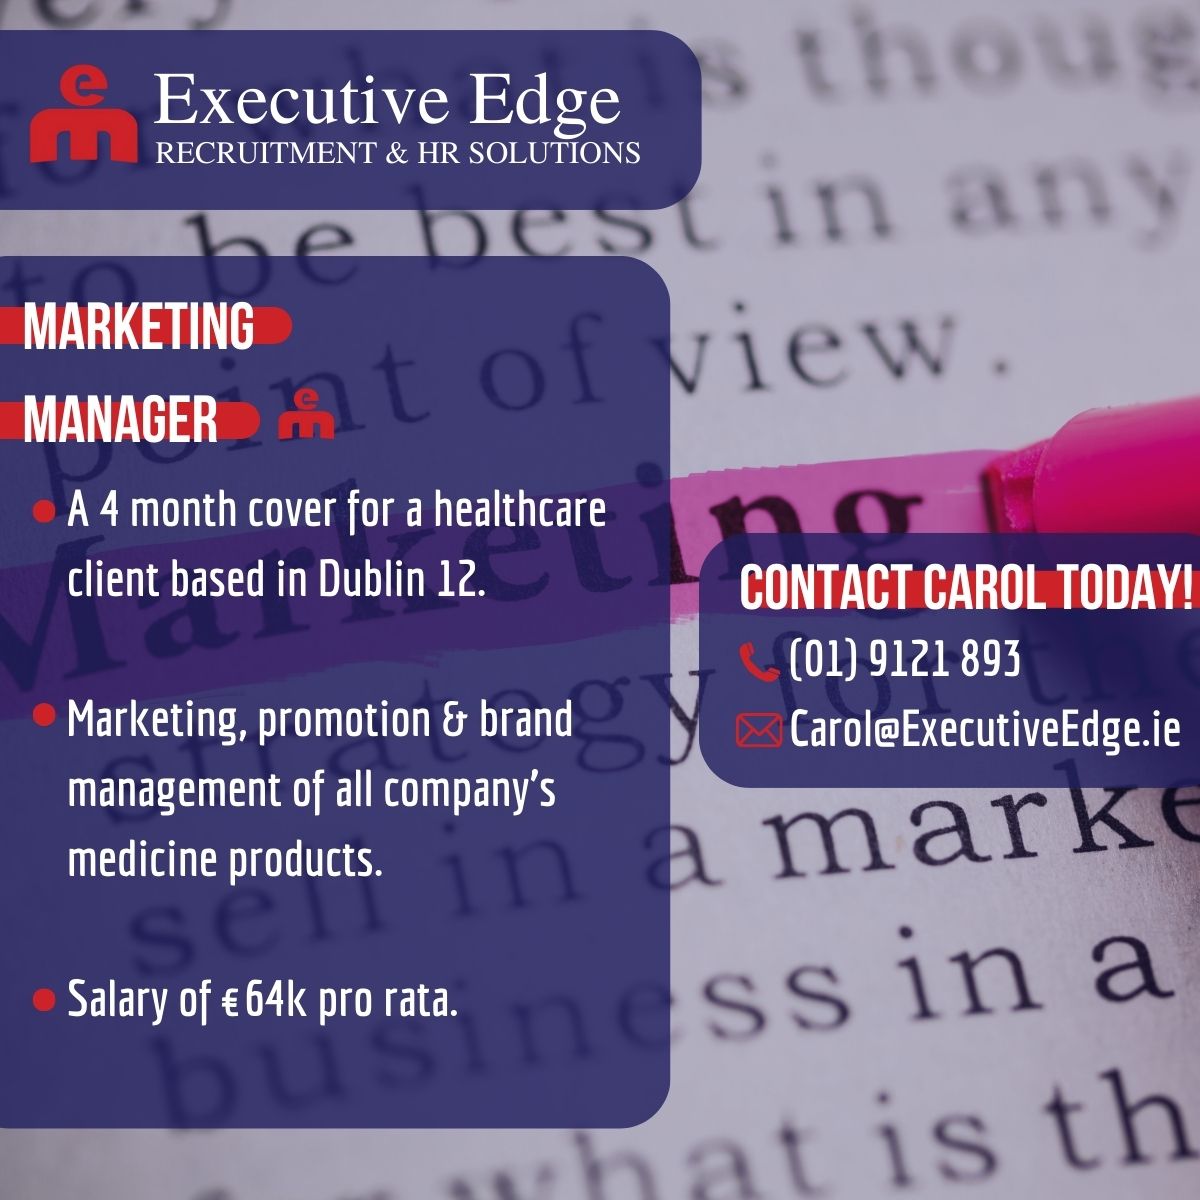 Carol has an opening for a Marketing Manager in a temporary role with a healthcare client. Chat with Carol today on (01) 9121 893 about this role!
Find out more at: executiveedge.ie/job/marketing-…
#DublinJobs